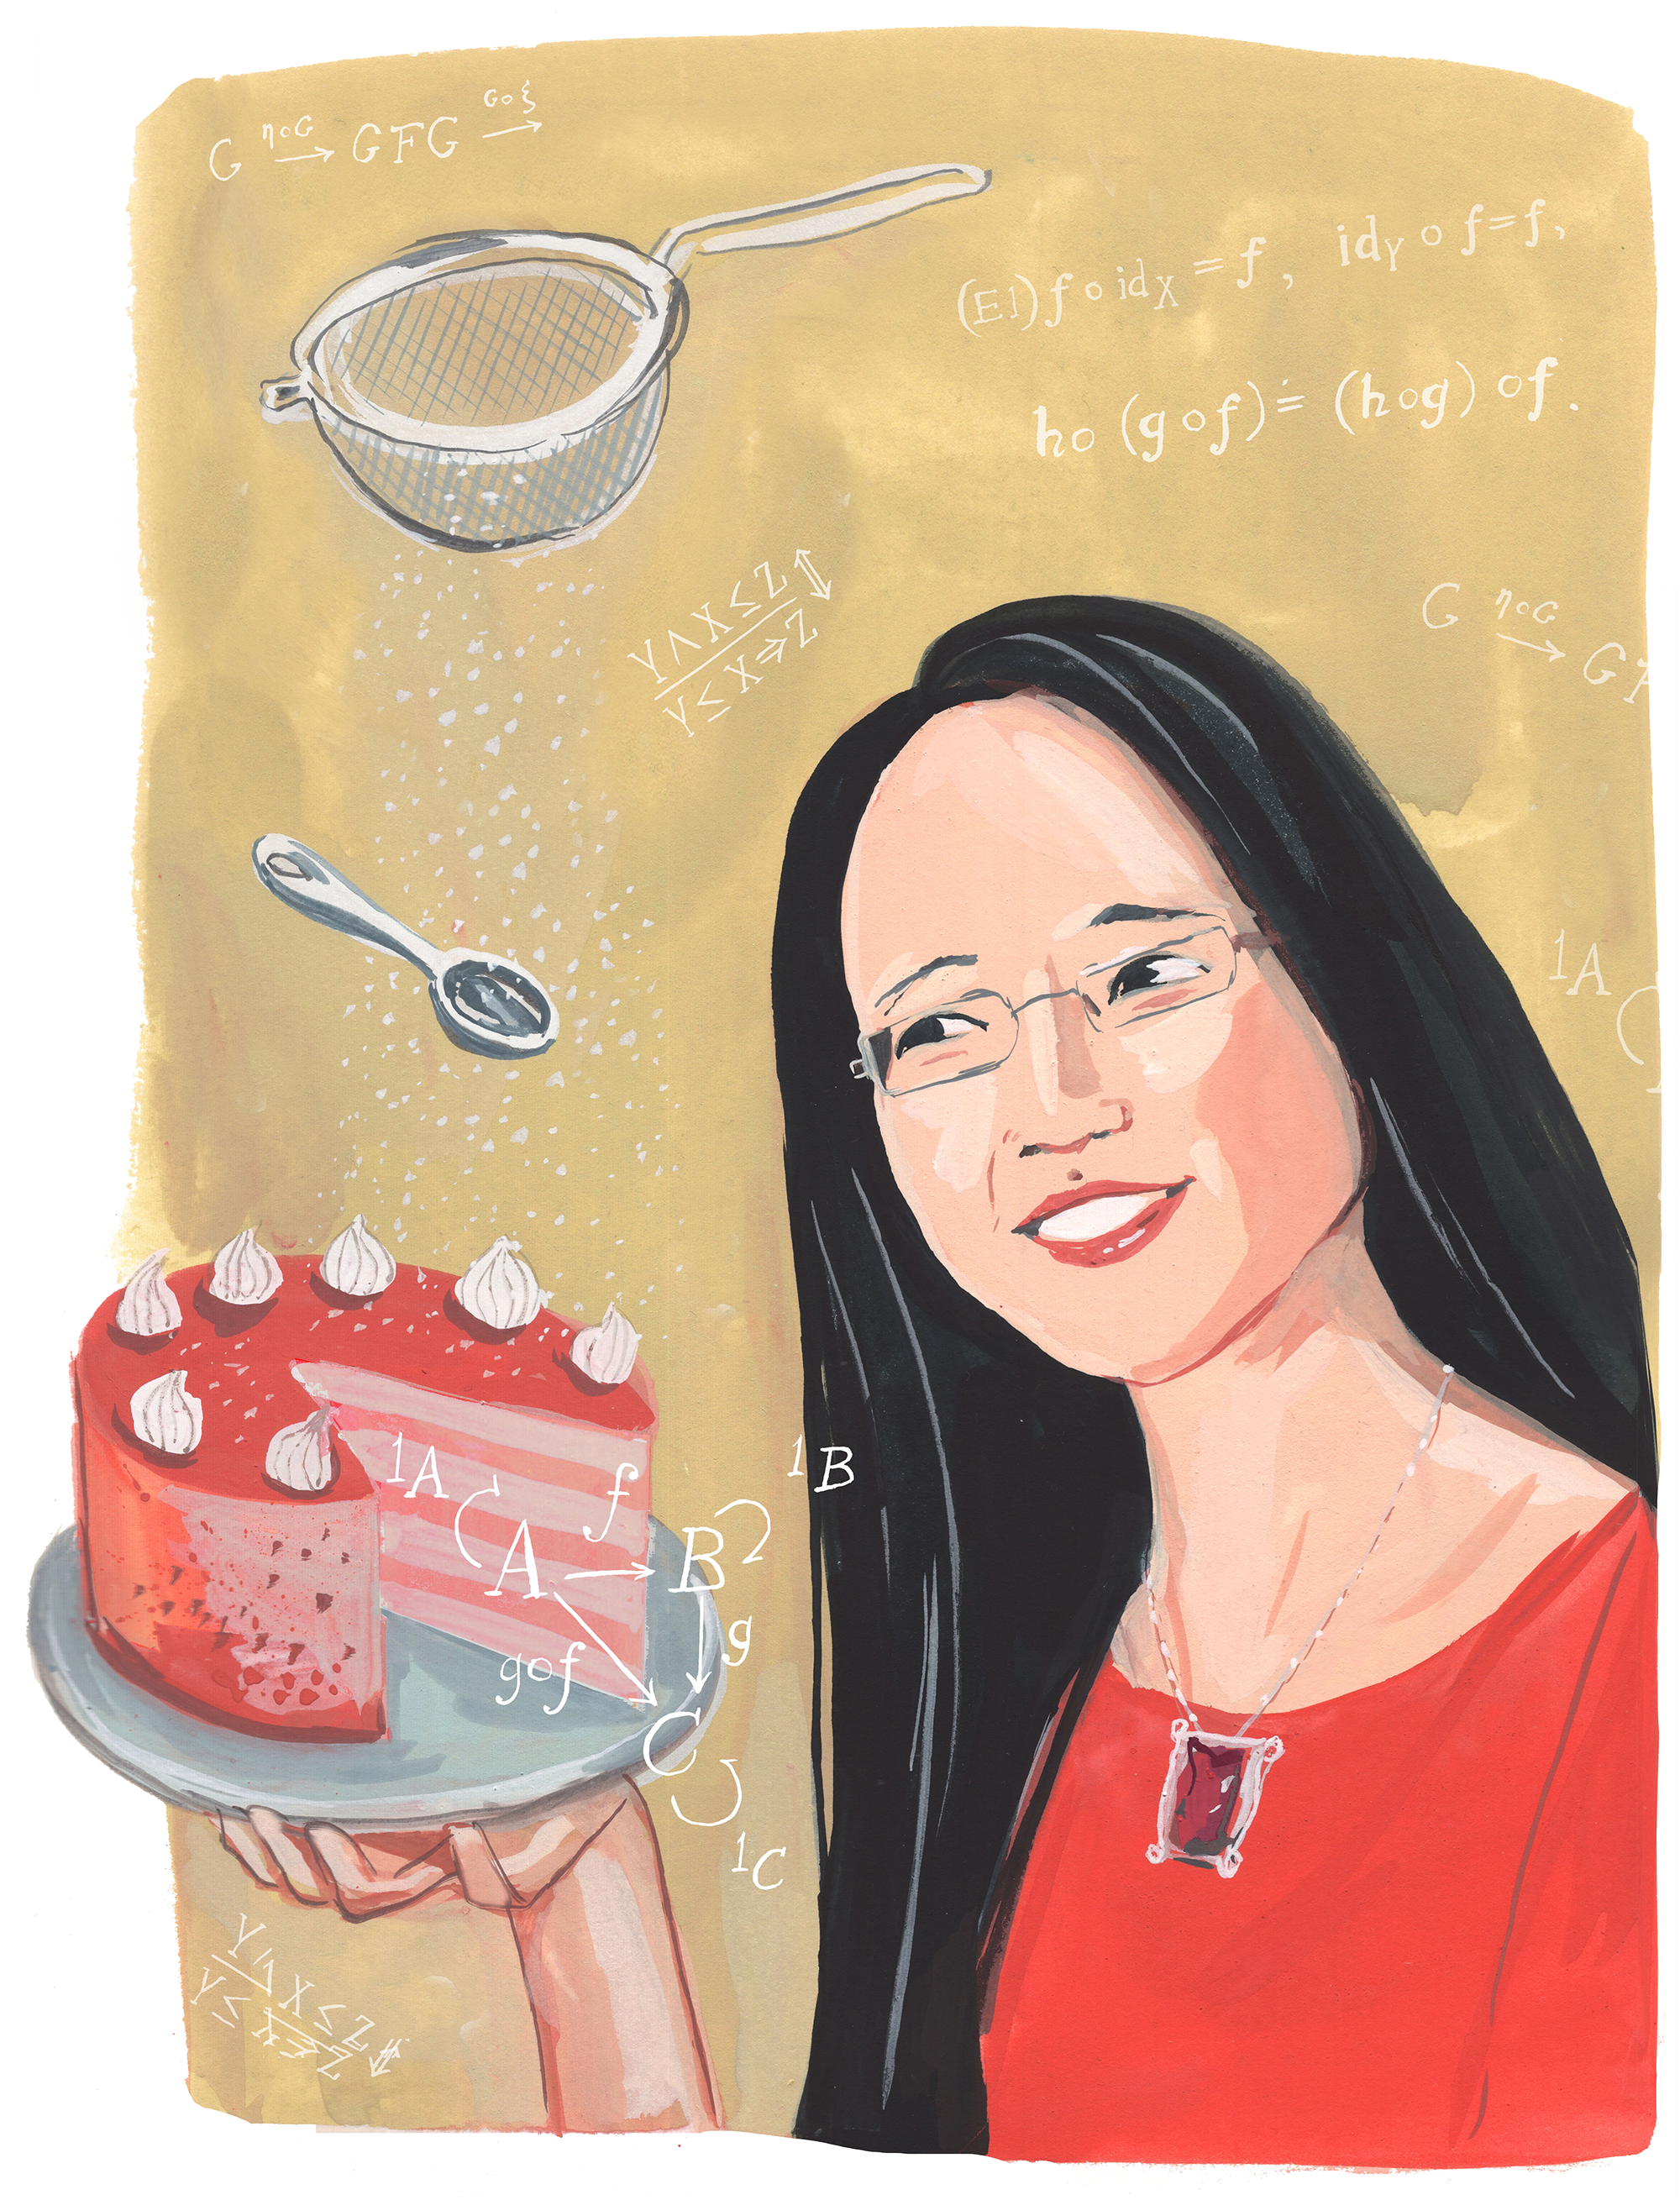 Eugenia Cheng holds a cake as sugar sprinkles down on it from a sieve. Equations are handwritten in the background.